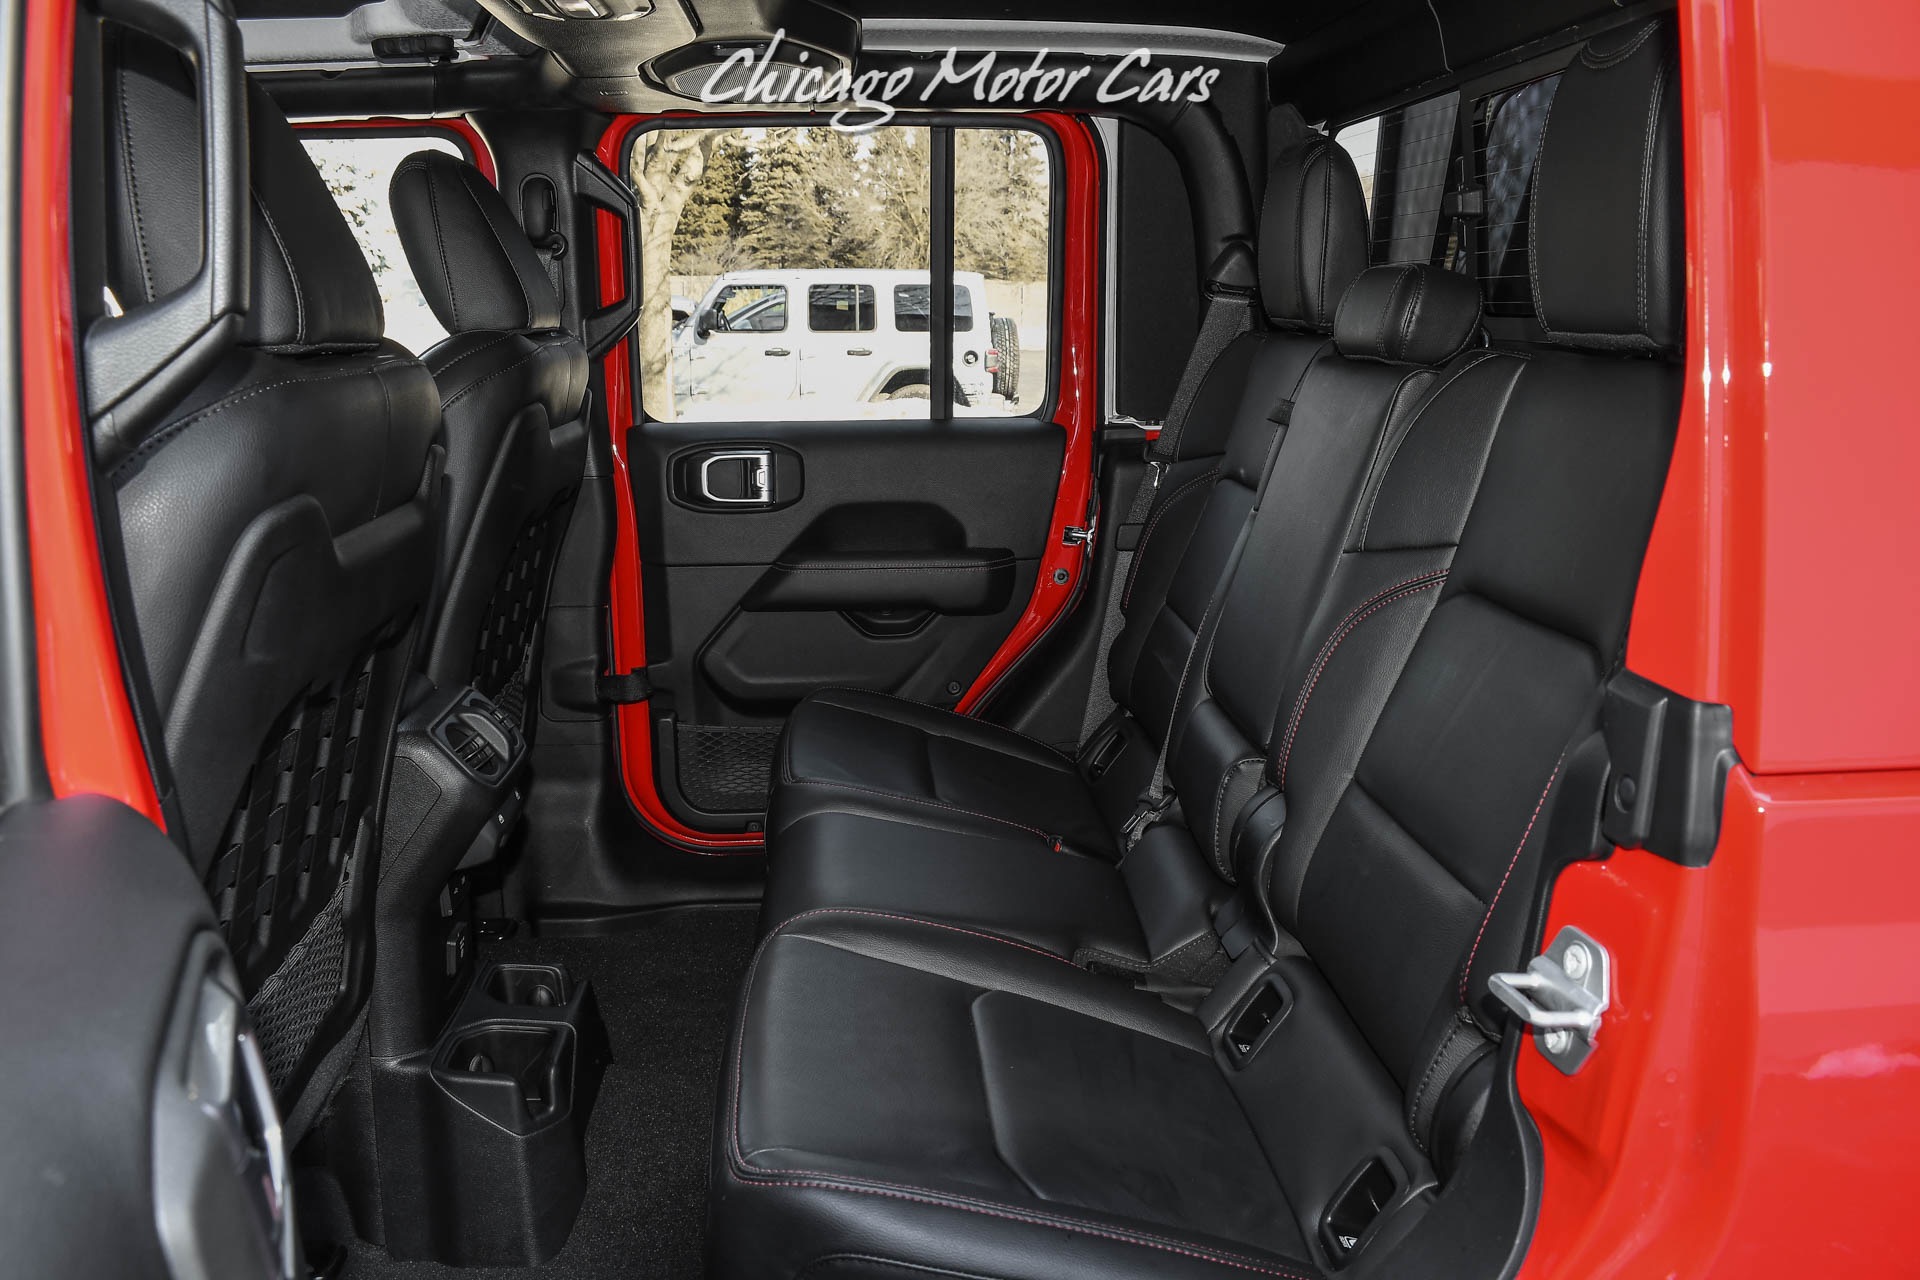 Used-2020-Jeep-Gladiator-Rubicon-Launch-Edition-62kMSRP-OVER-15k-in-Upgrades-Overlanding-Setup